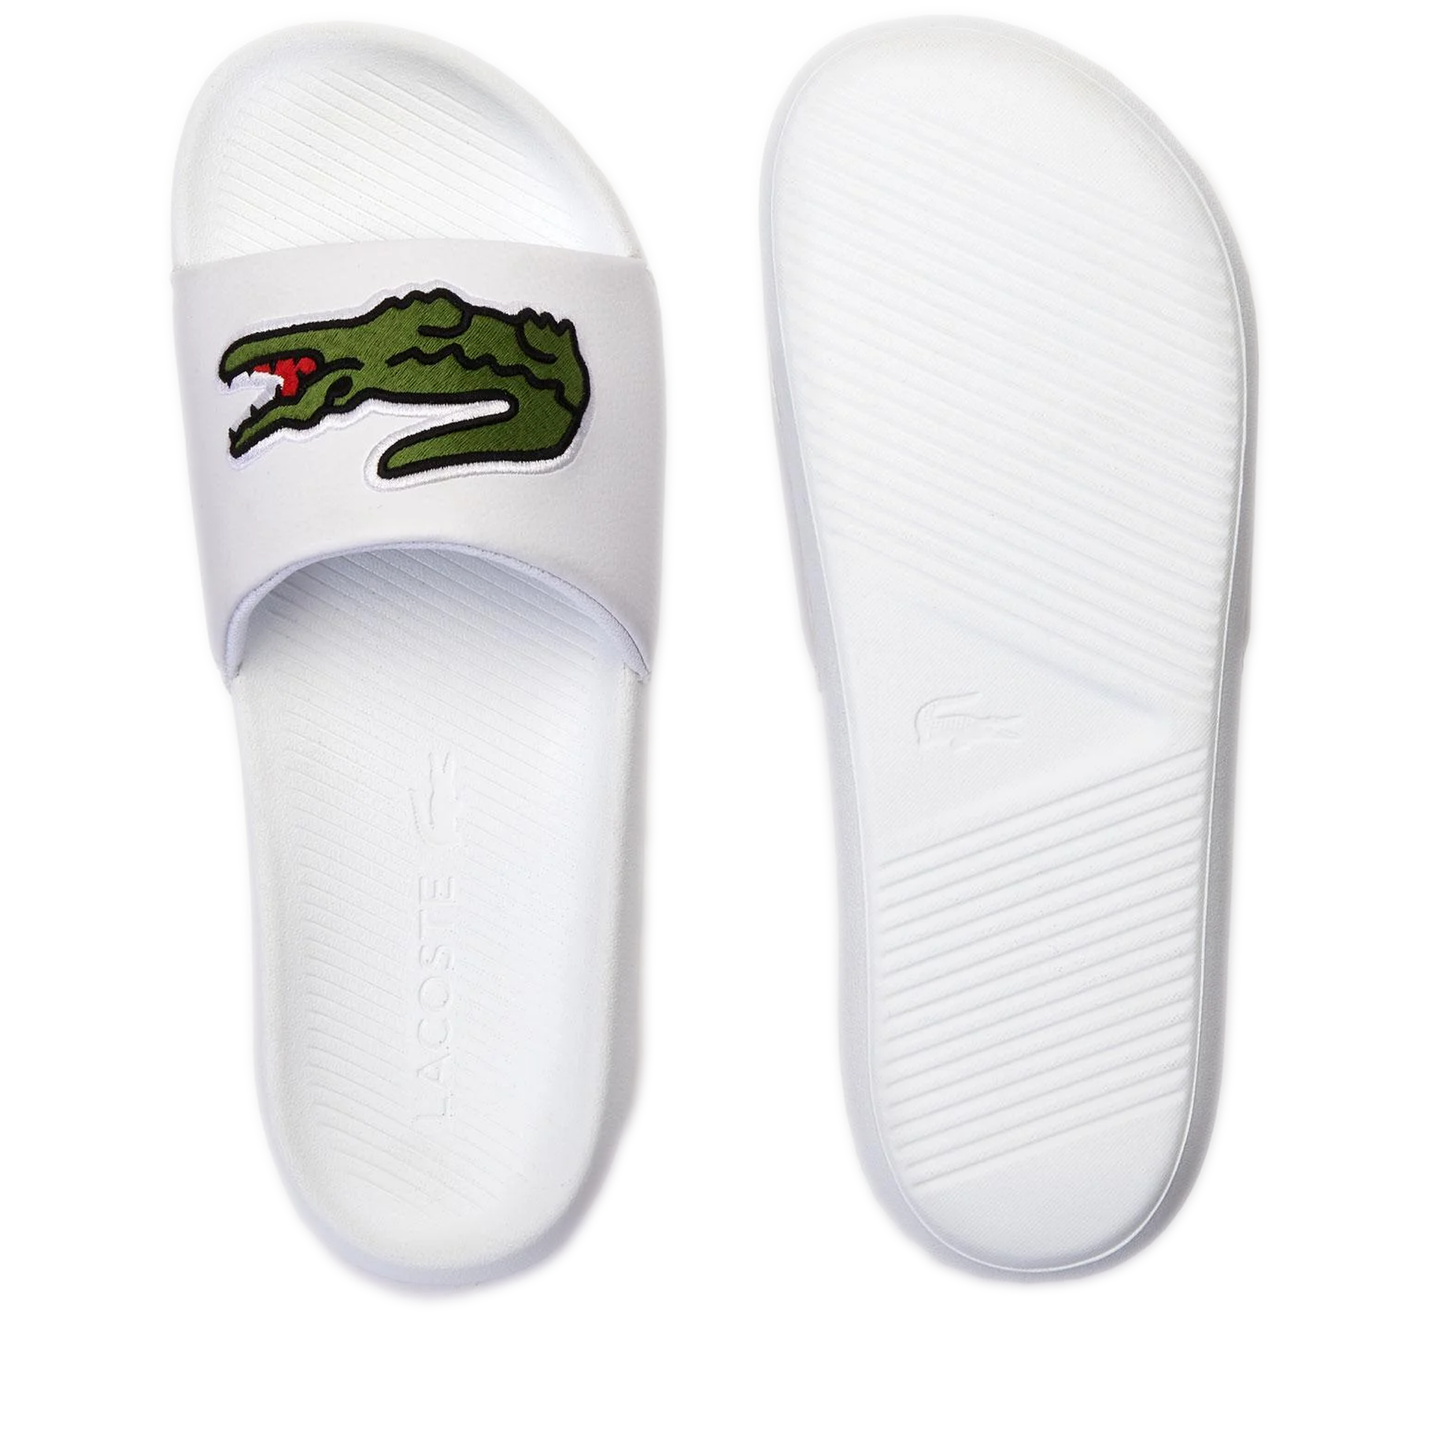 Men's Lacoste Croco Synthetic Slides - White/ Green